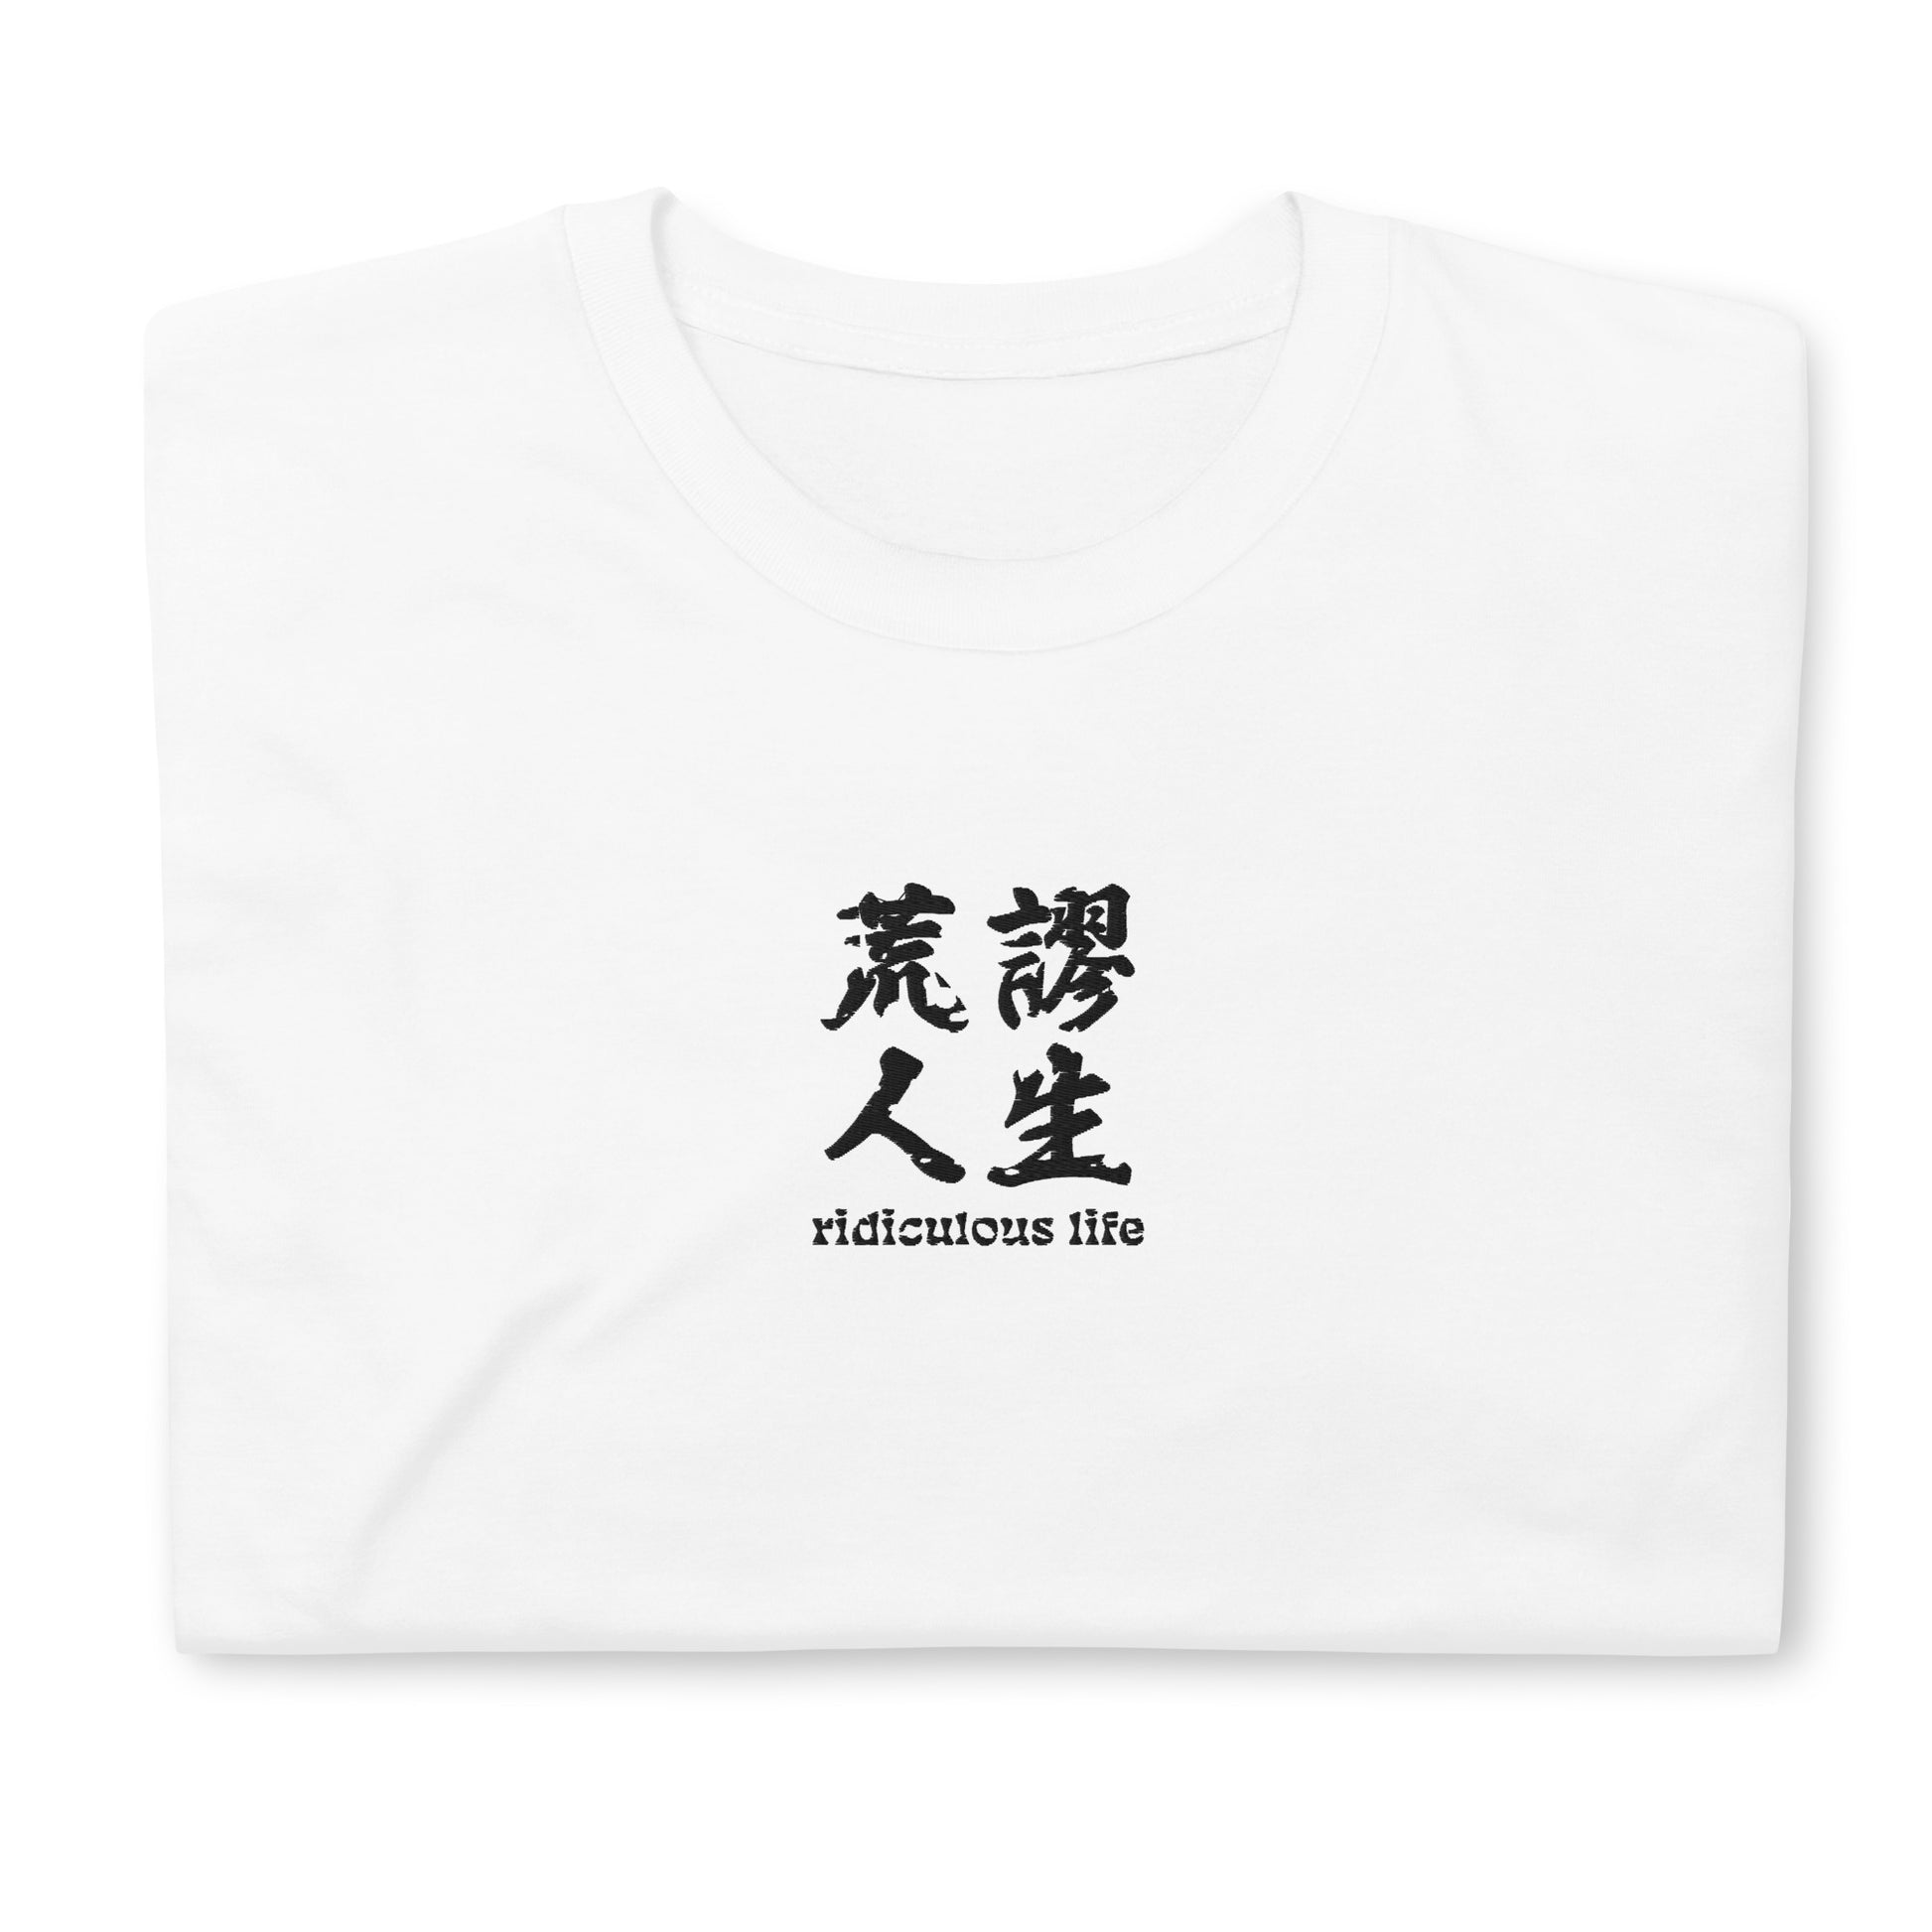 White High Quality Tee - Front Design with an Black Embroidery "Ridiculous Life" in Chinese and English 